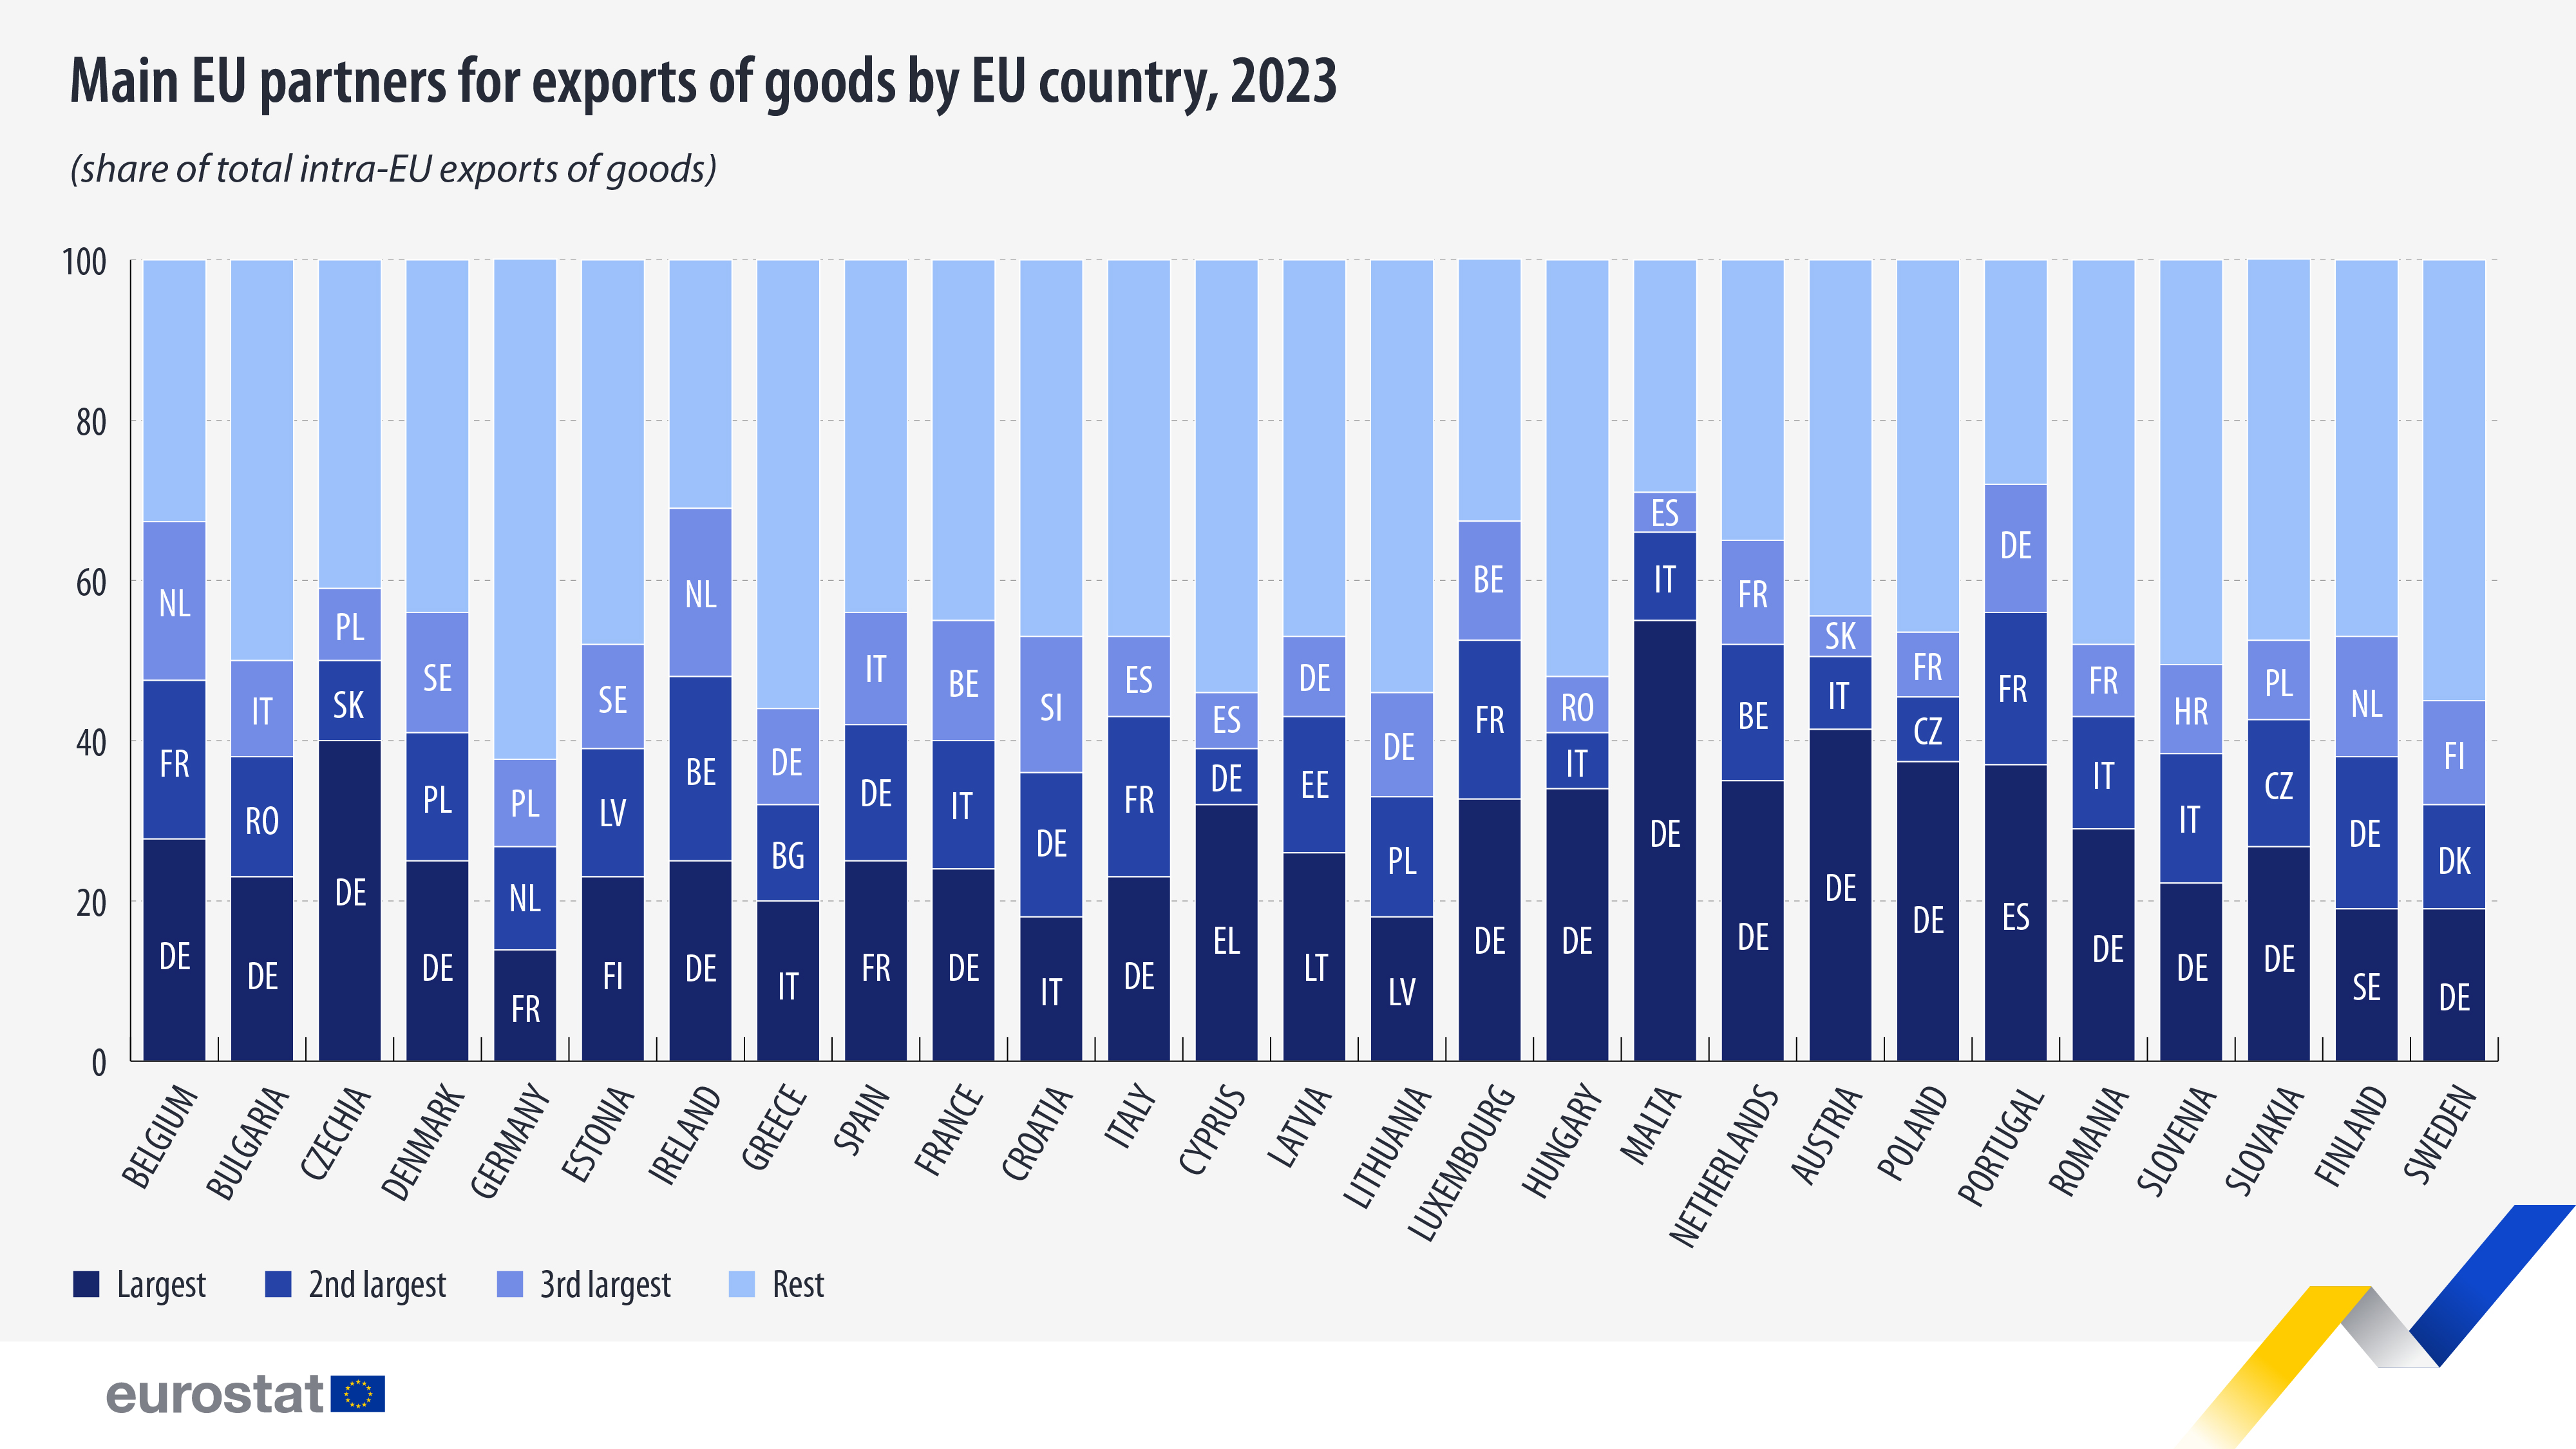 main EU partners for exports of goods by EU country 2023